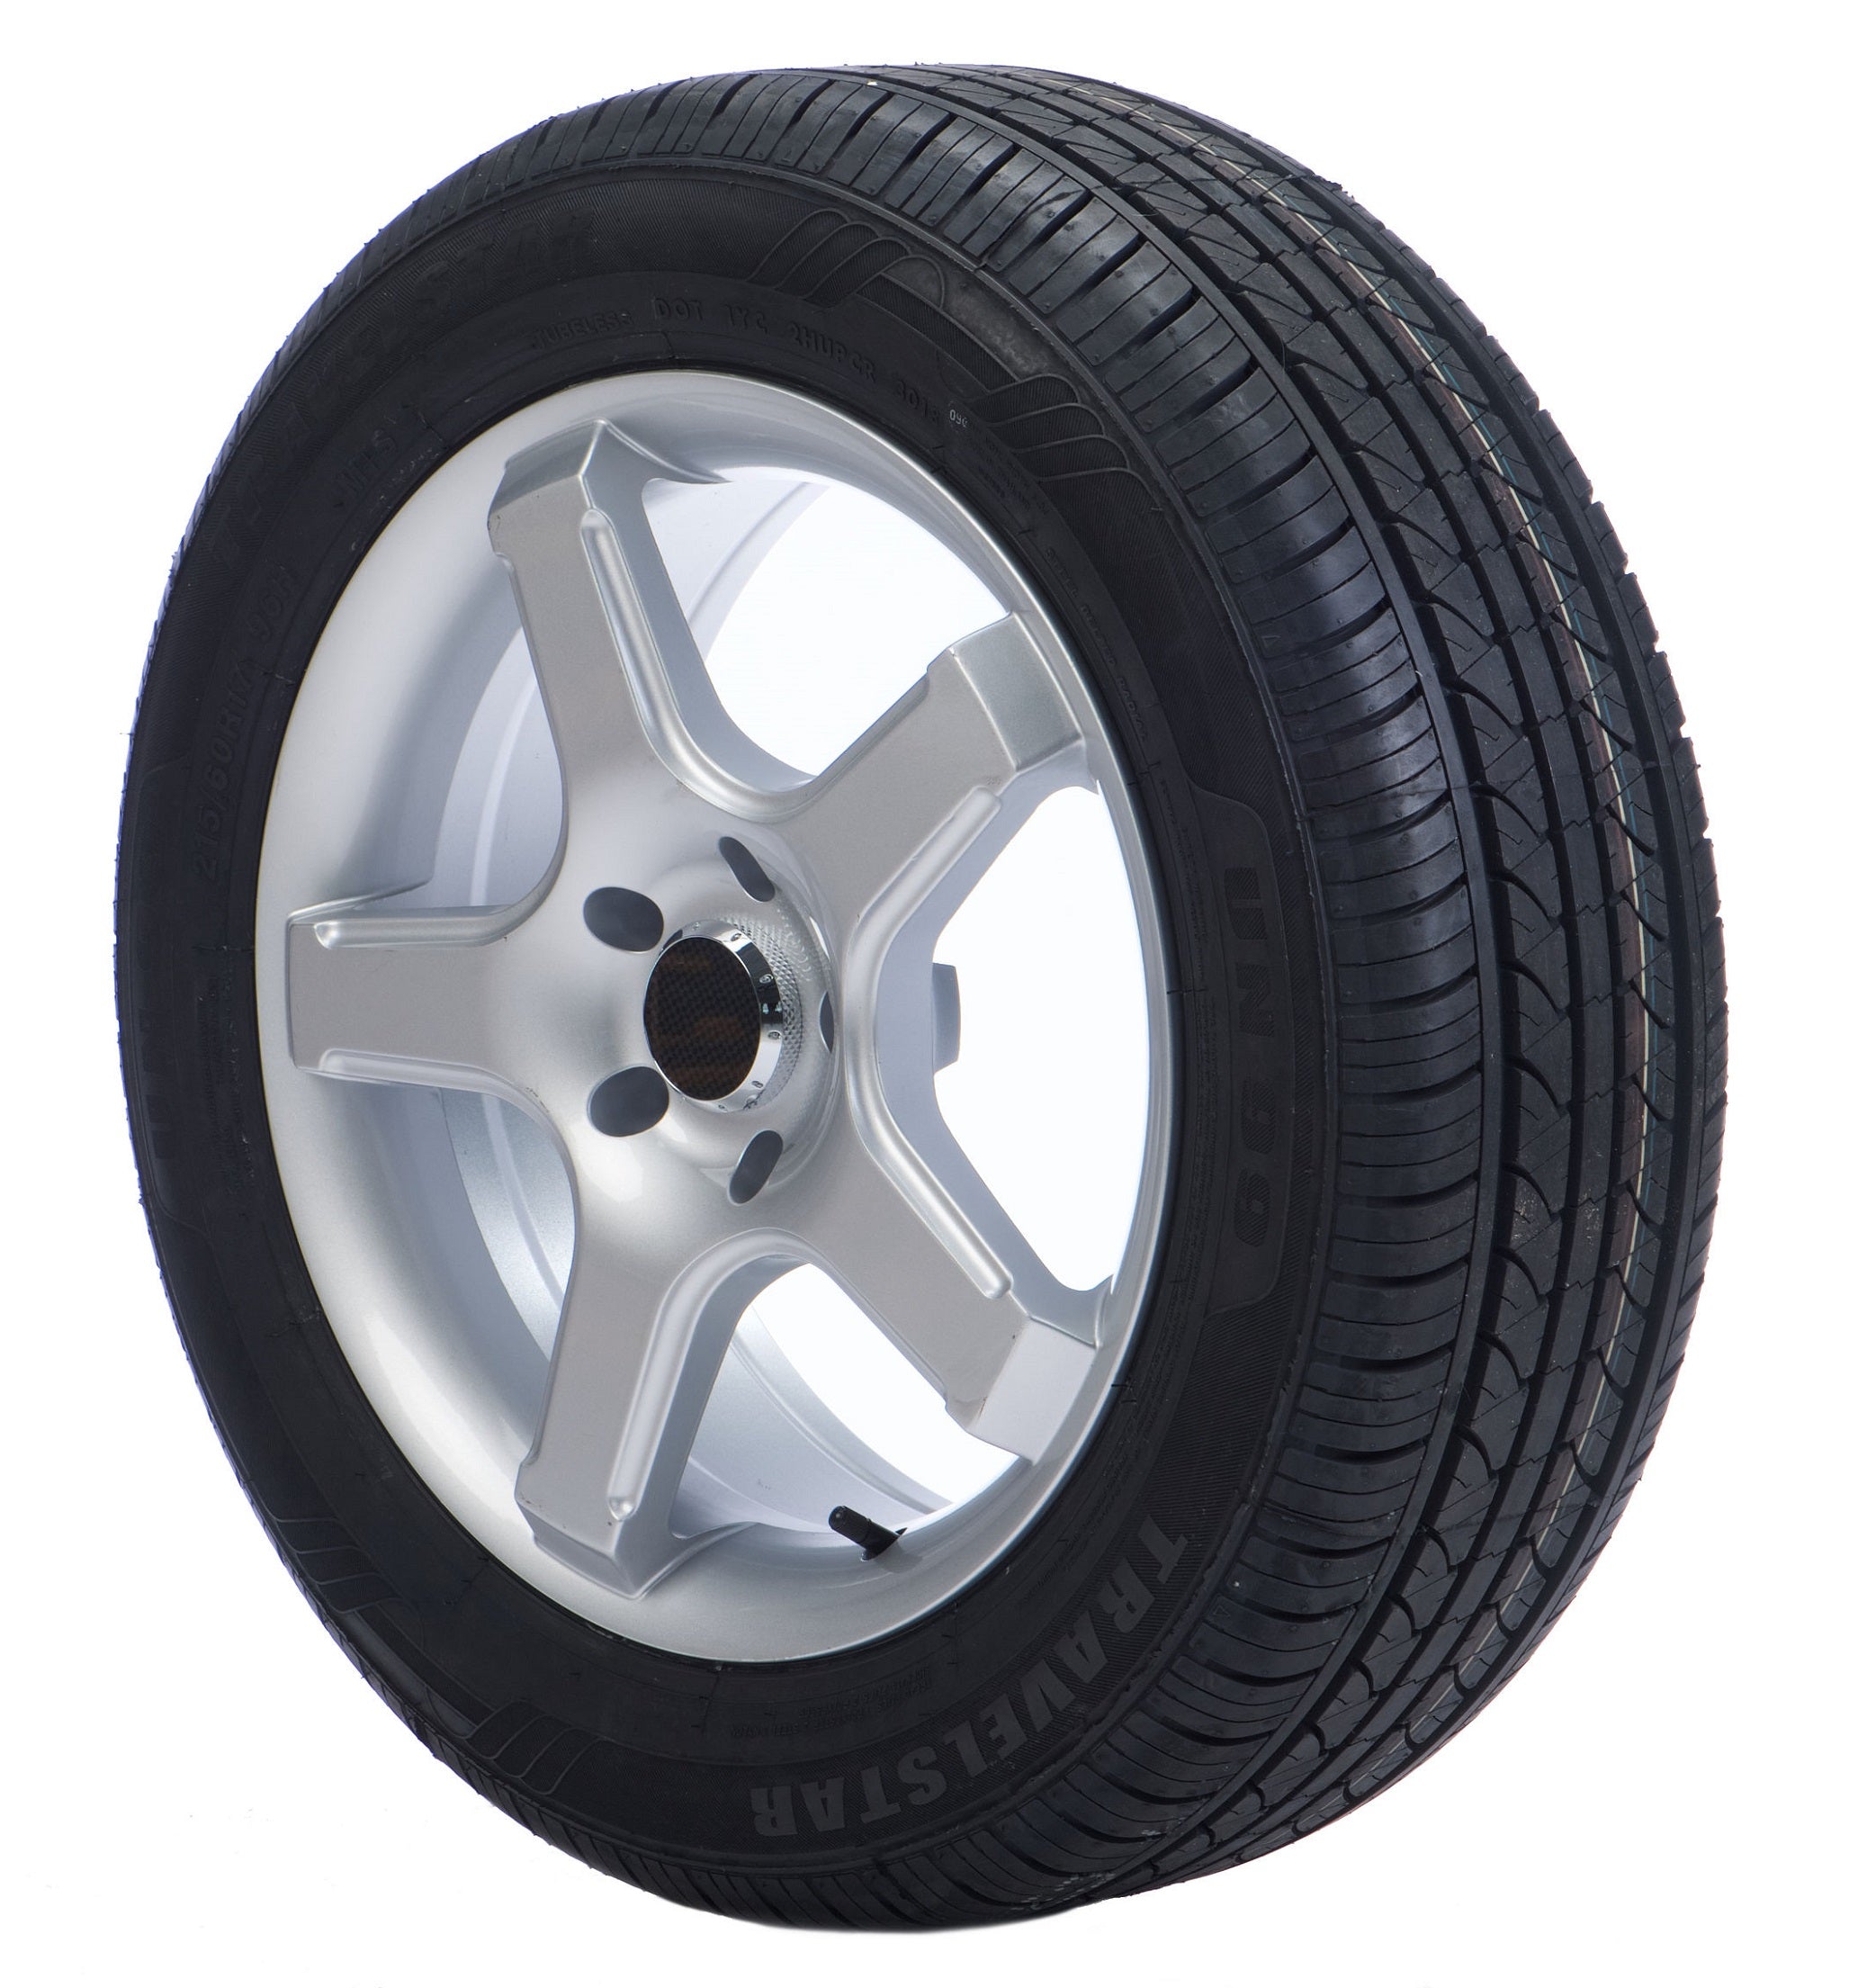 Shop for 215/60R17 Tires for Your Vehicle